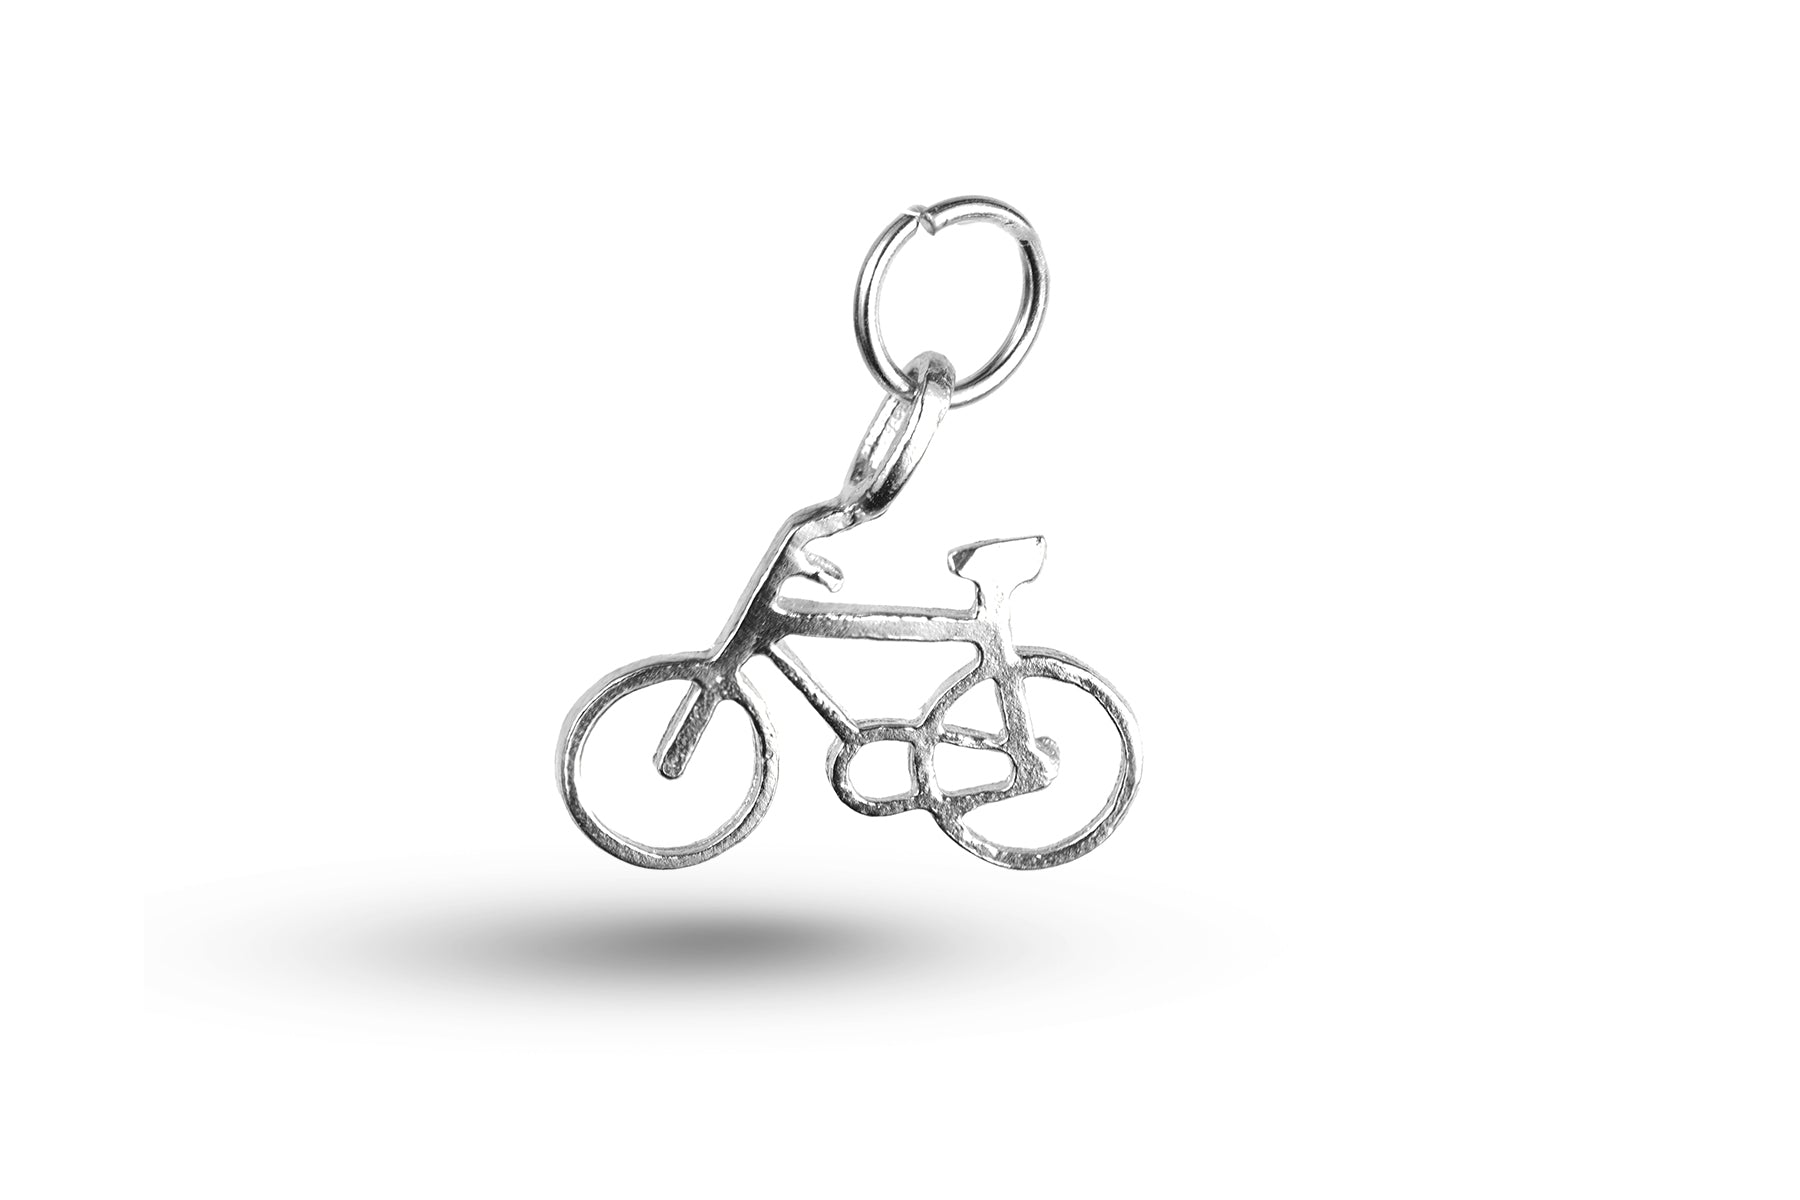 Luxury white gold bicycle charm.